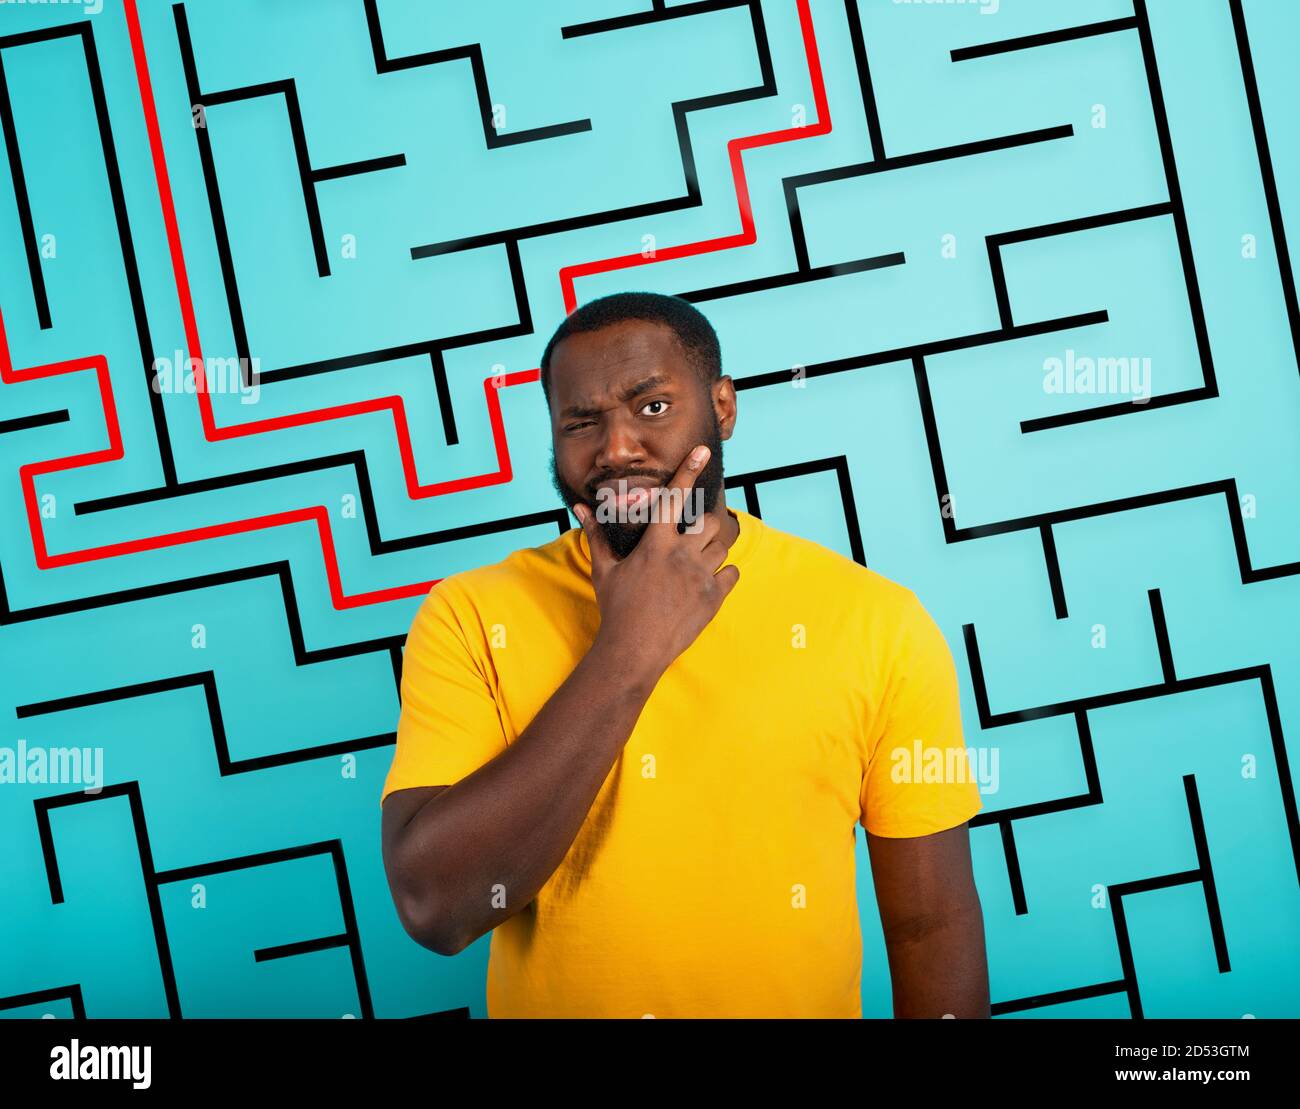 Confused Man has a big maze to solve. Concept of options, confusion, decision. Stock Photo